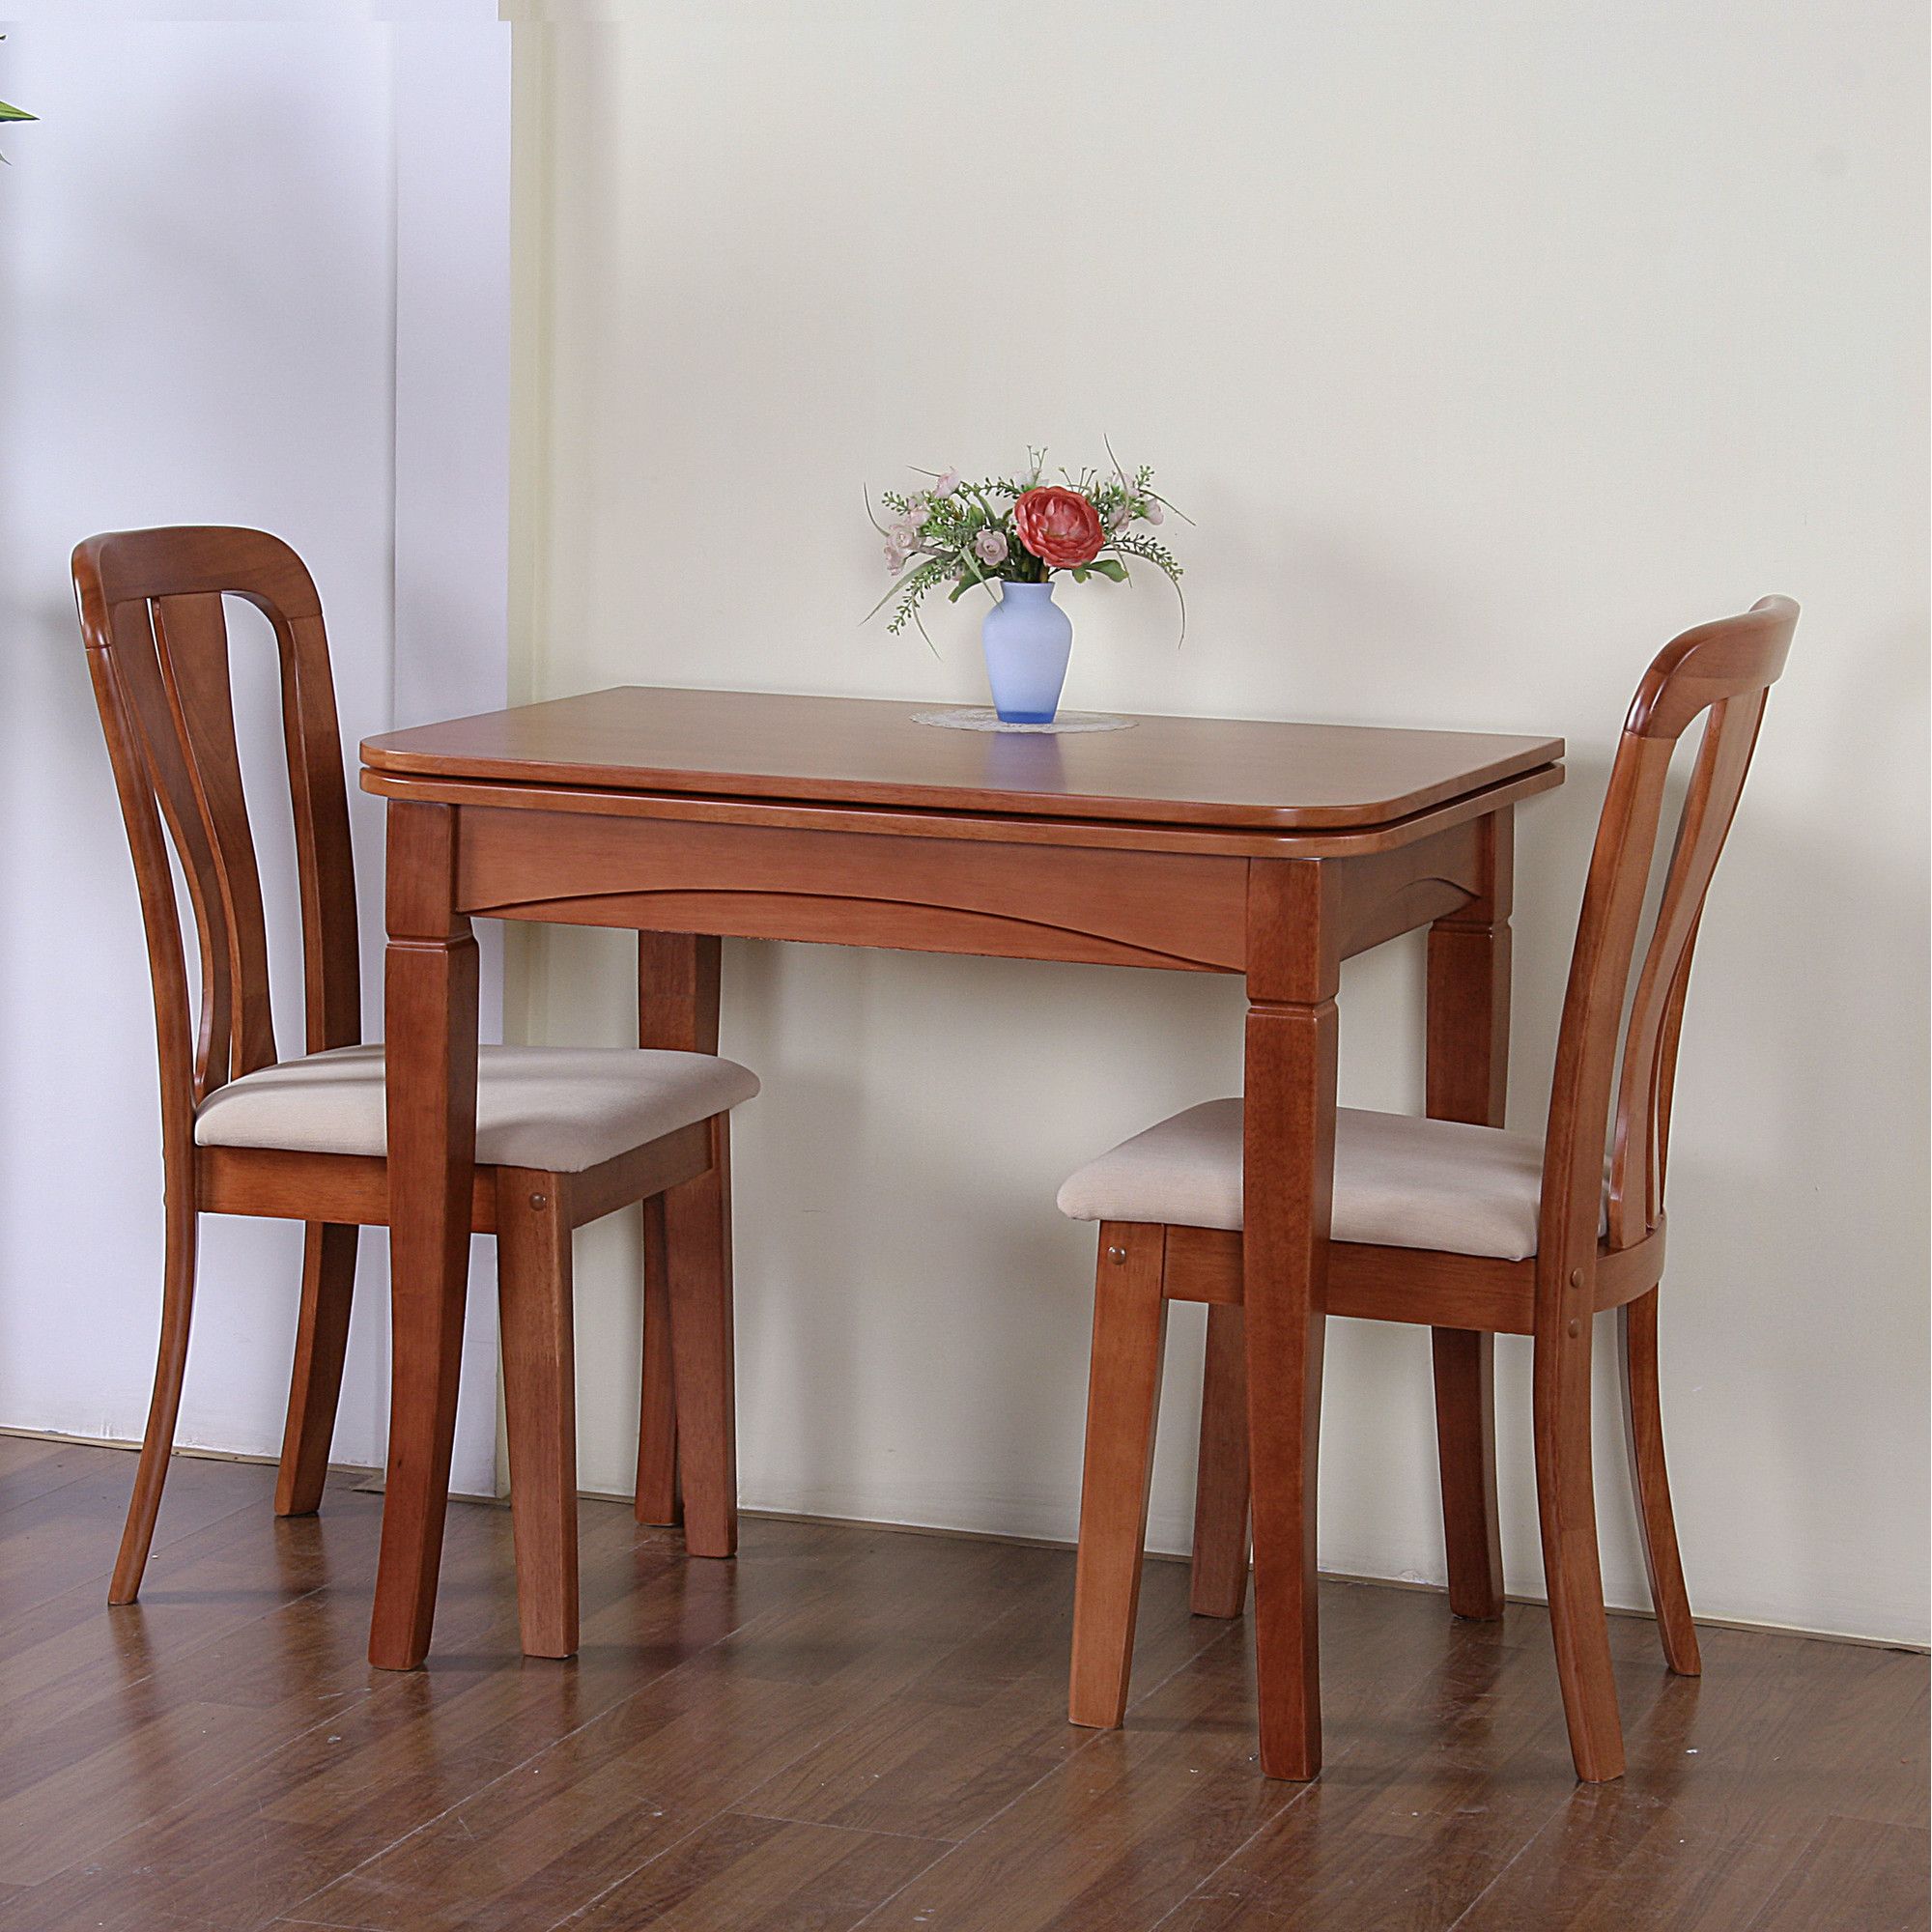 G&P Furniture Windsor House 3-Piece Newark Flip Top Dining Set with Slatted Back Chair - Cherry at Tesco Direct